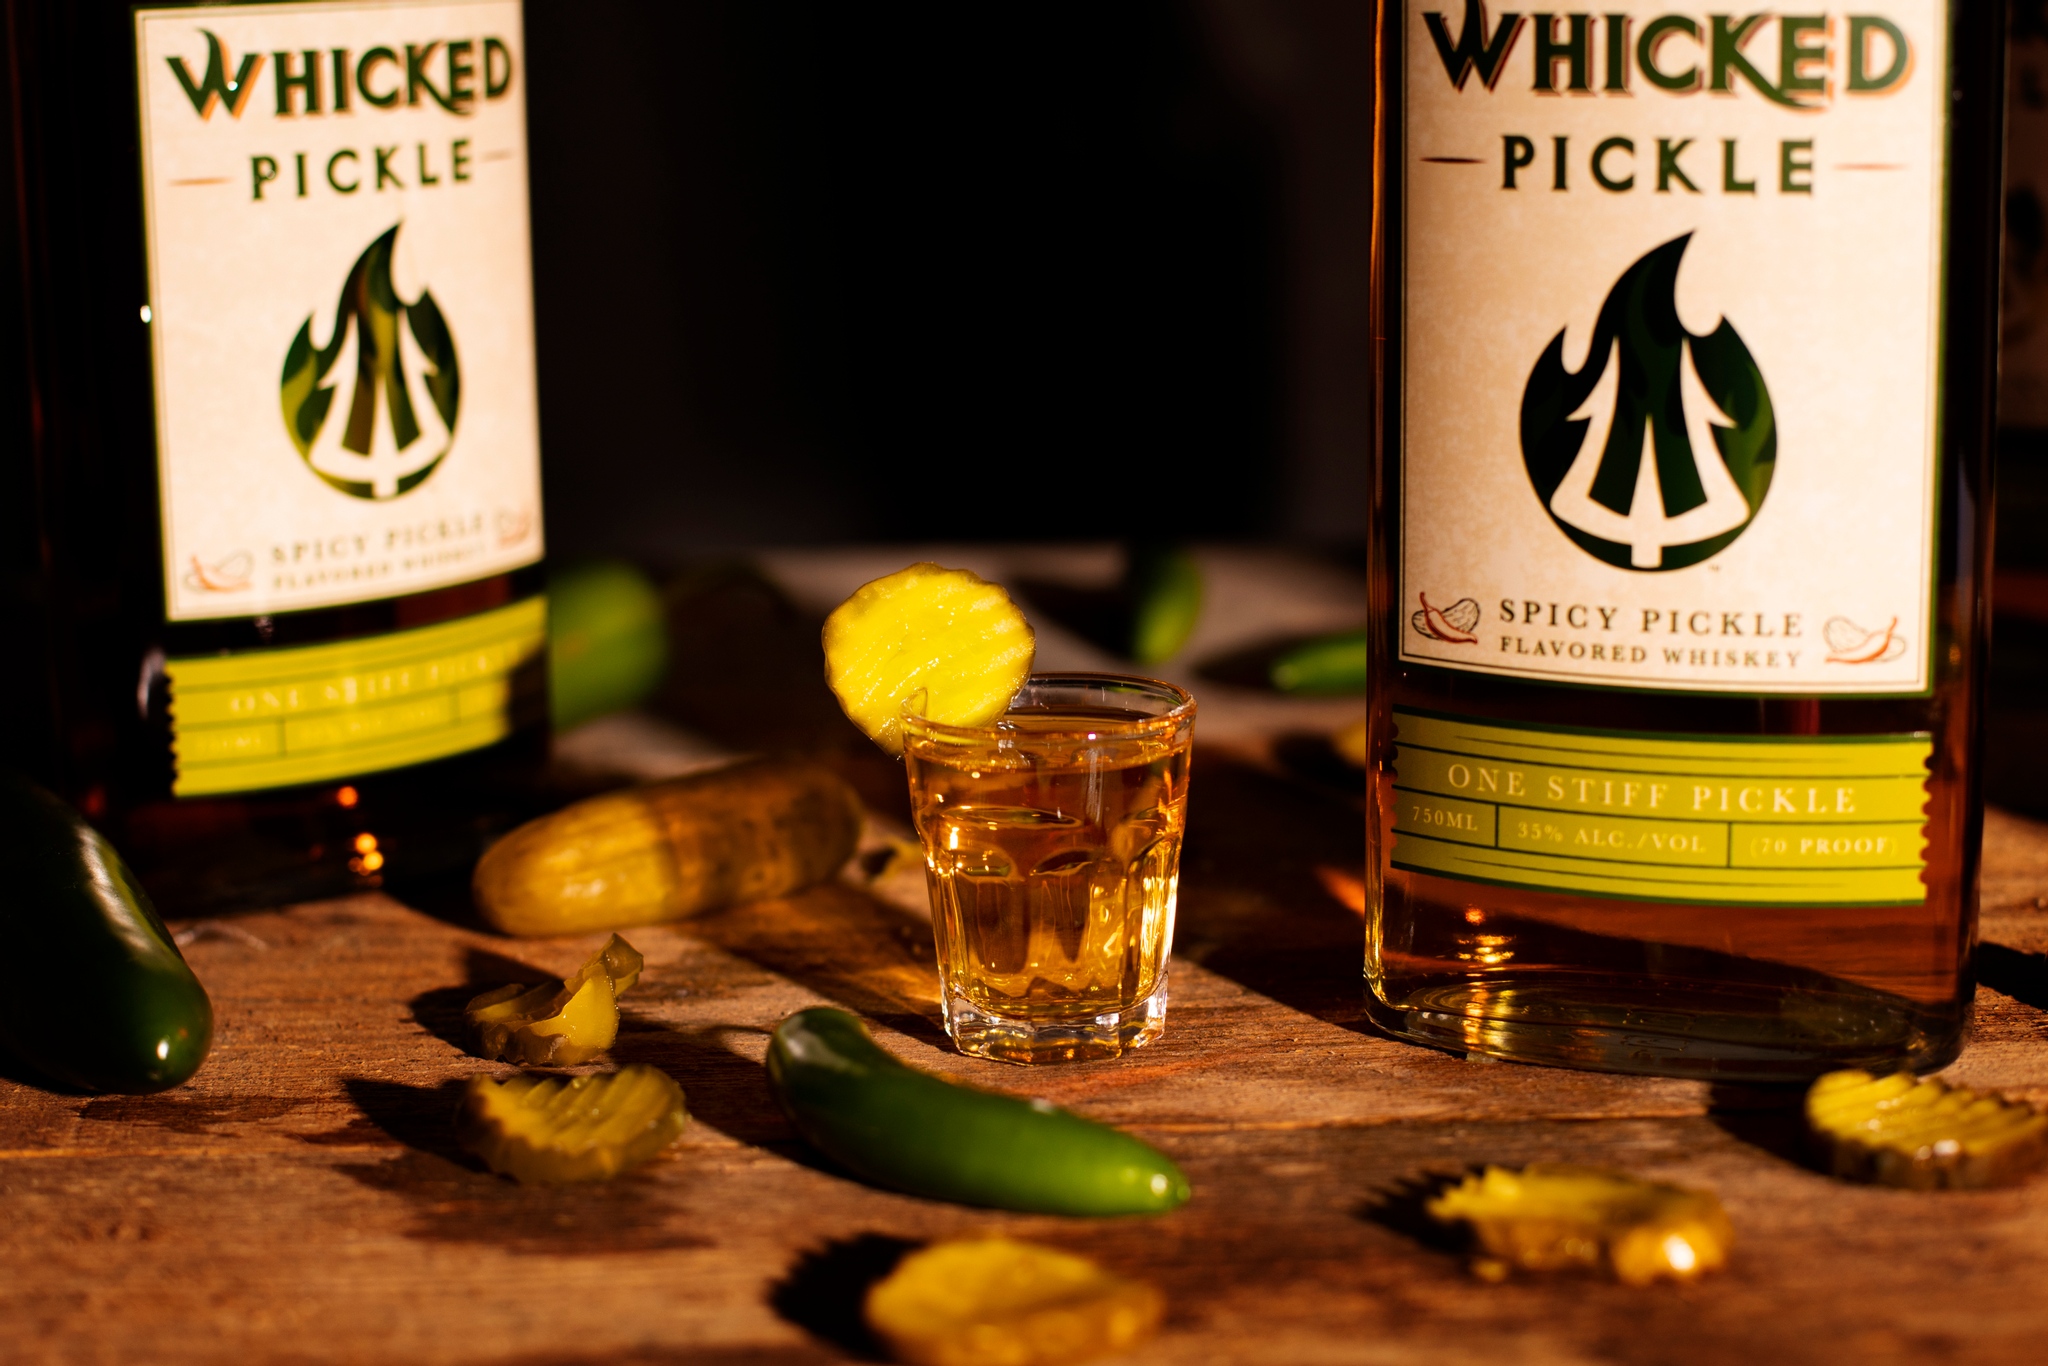 image of Whicked Pickle courtesy of Holladay Distillery